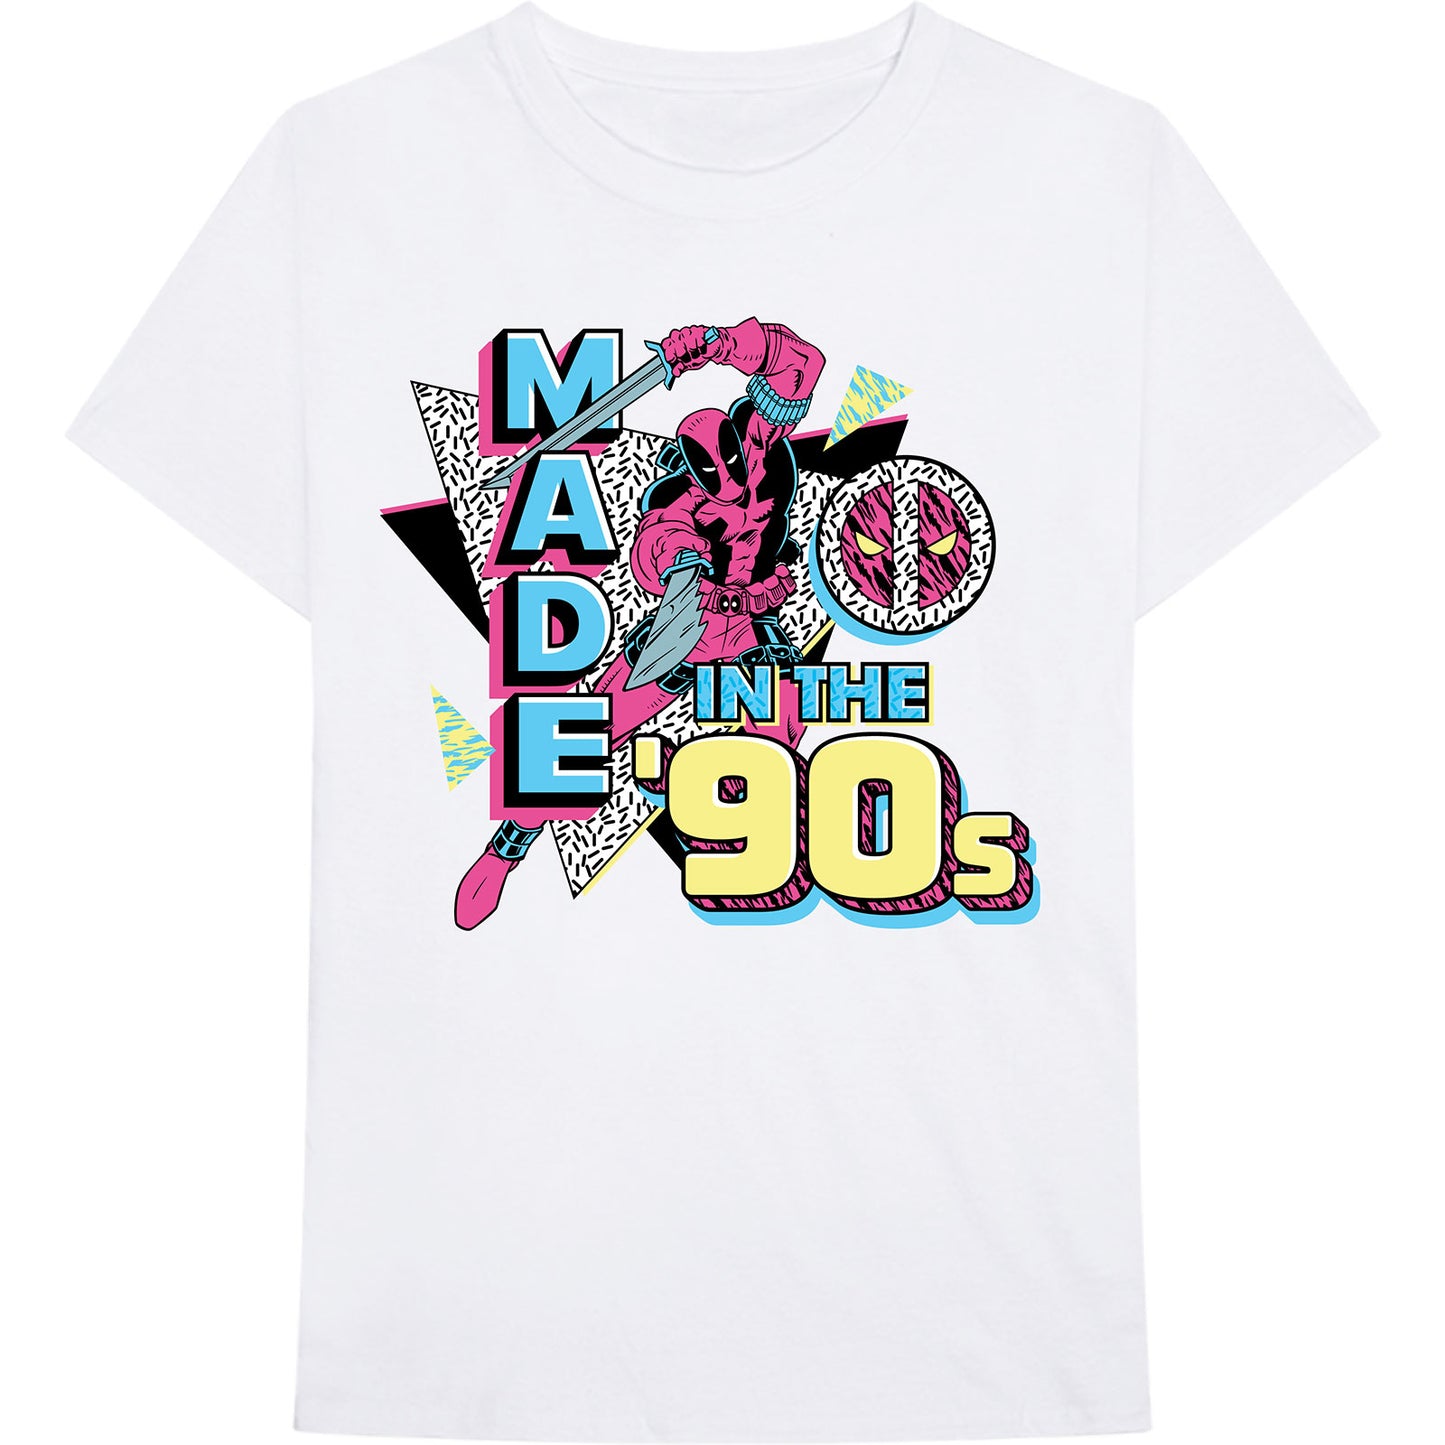 Marvel Comics T-Shirt: Deadpool Made In The 90s